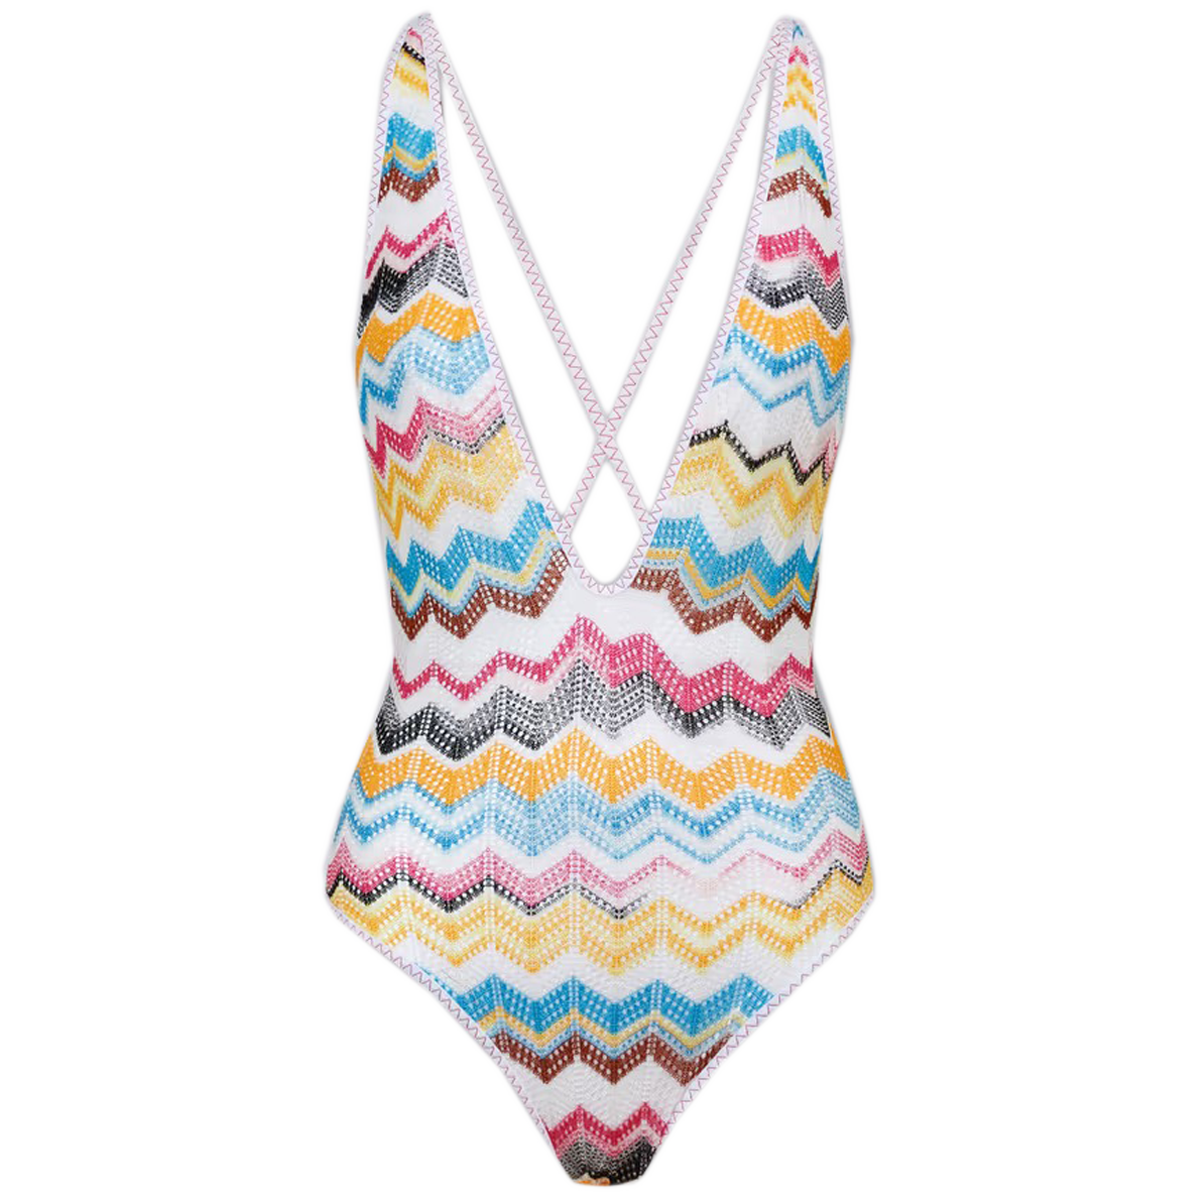 Knitted Multicolored Chevron